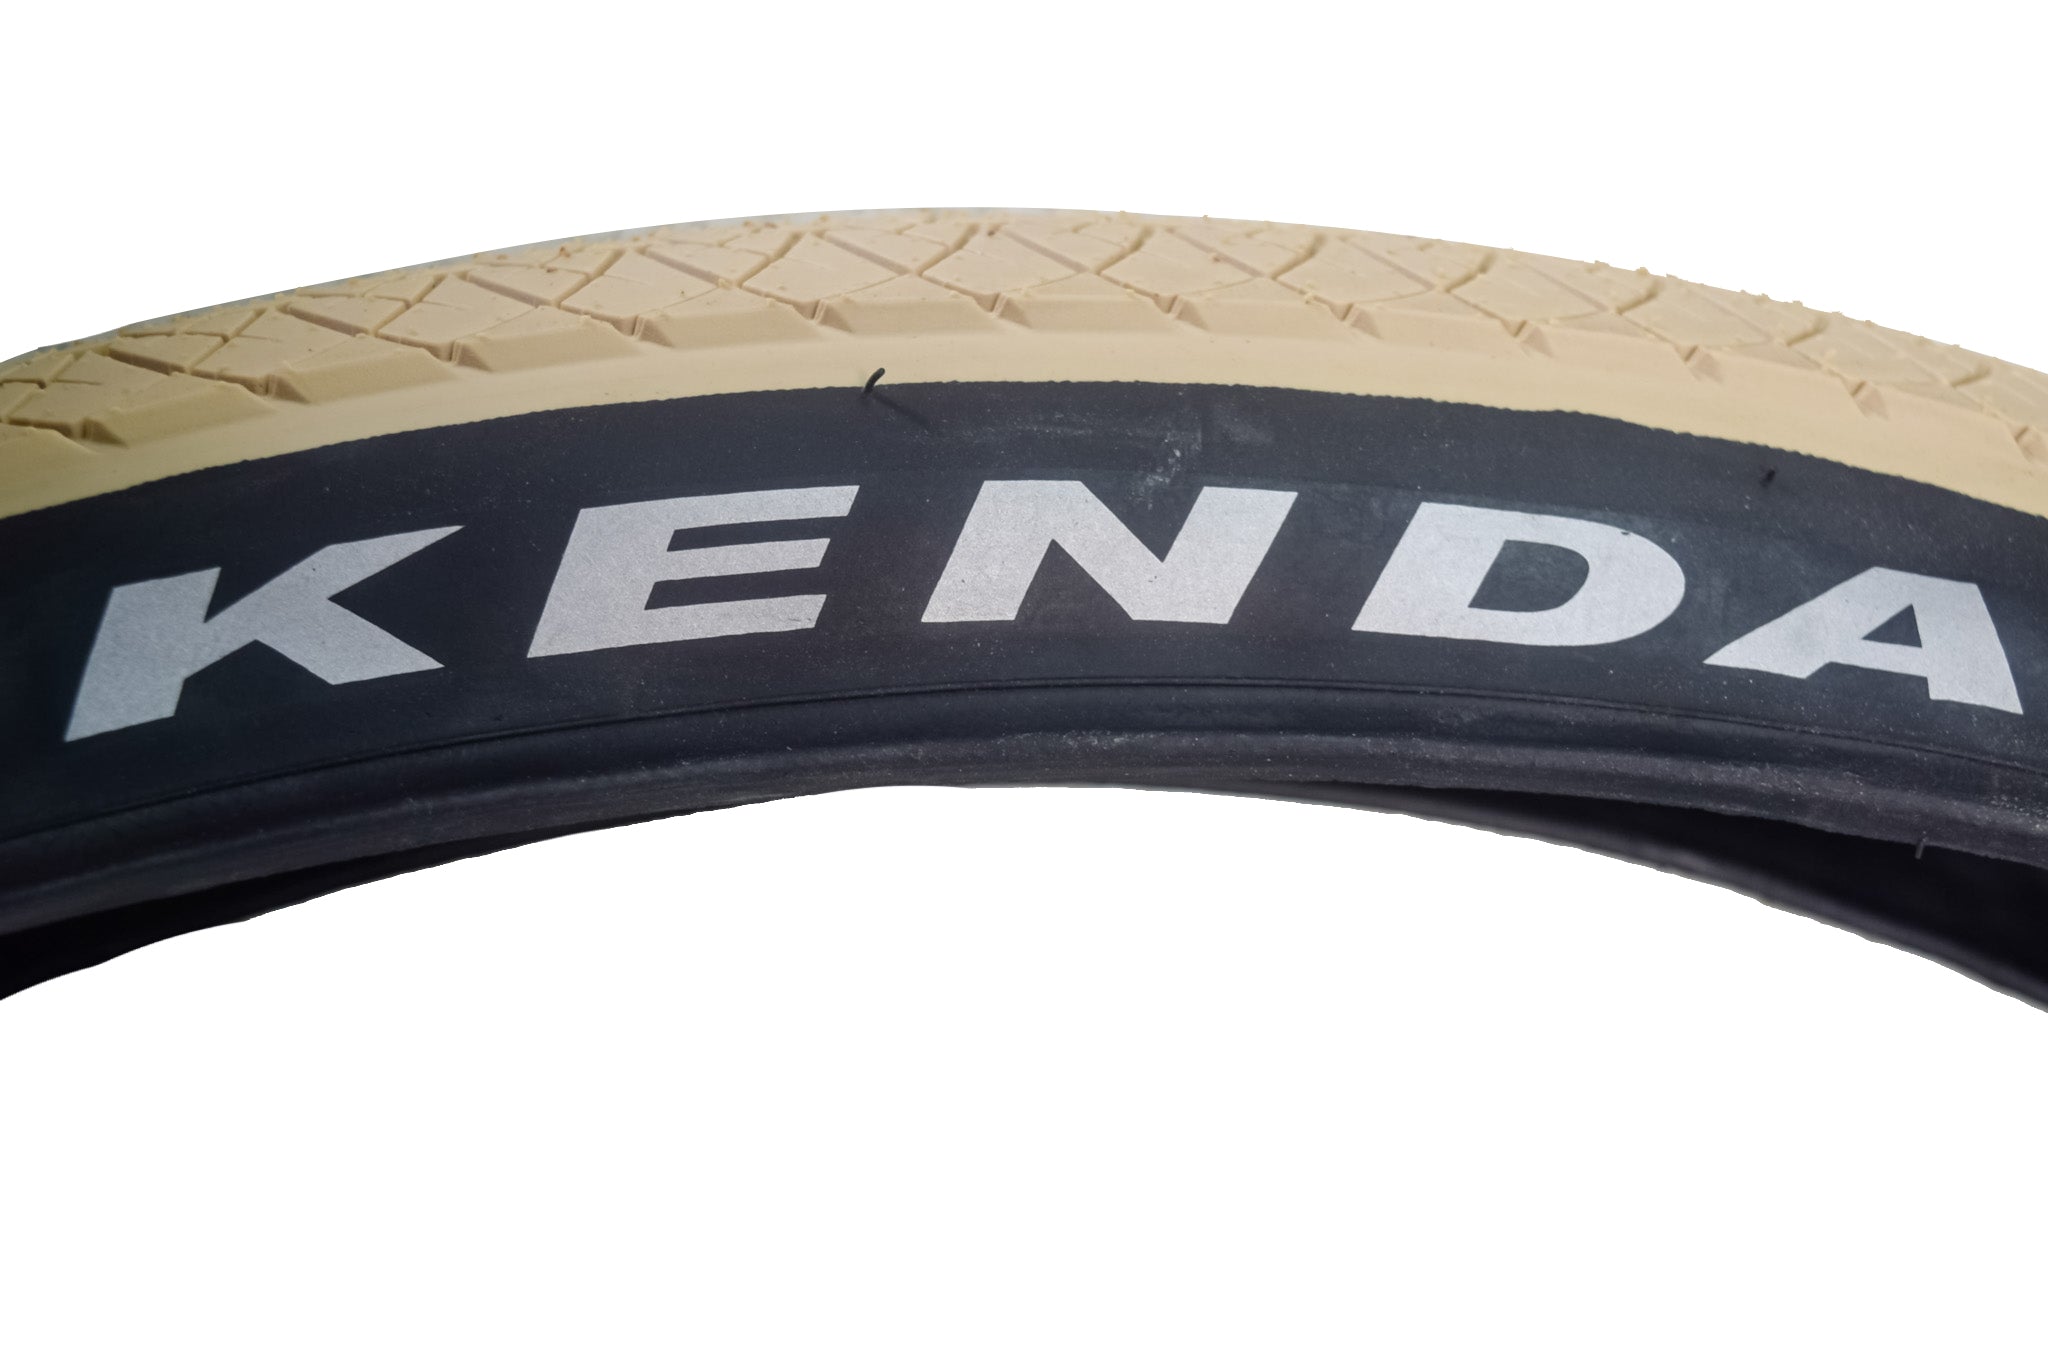 Kenda 3-Sixty Pro TR 120tpi Fold Tan 26x2.5 Bicycle Tire & Keychain (Two Pack)